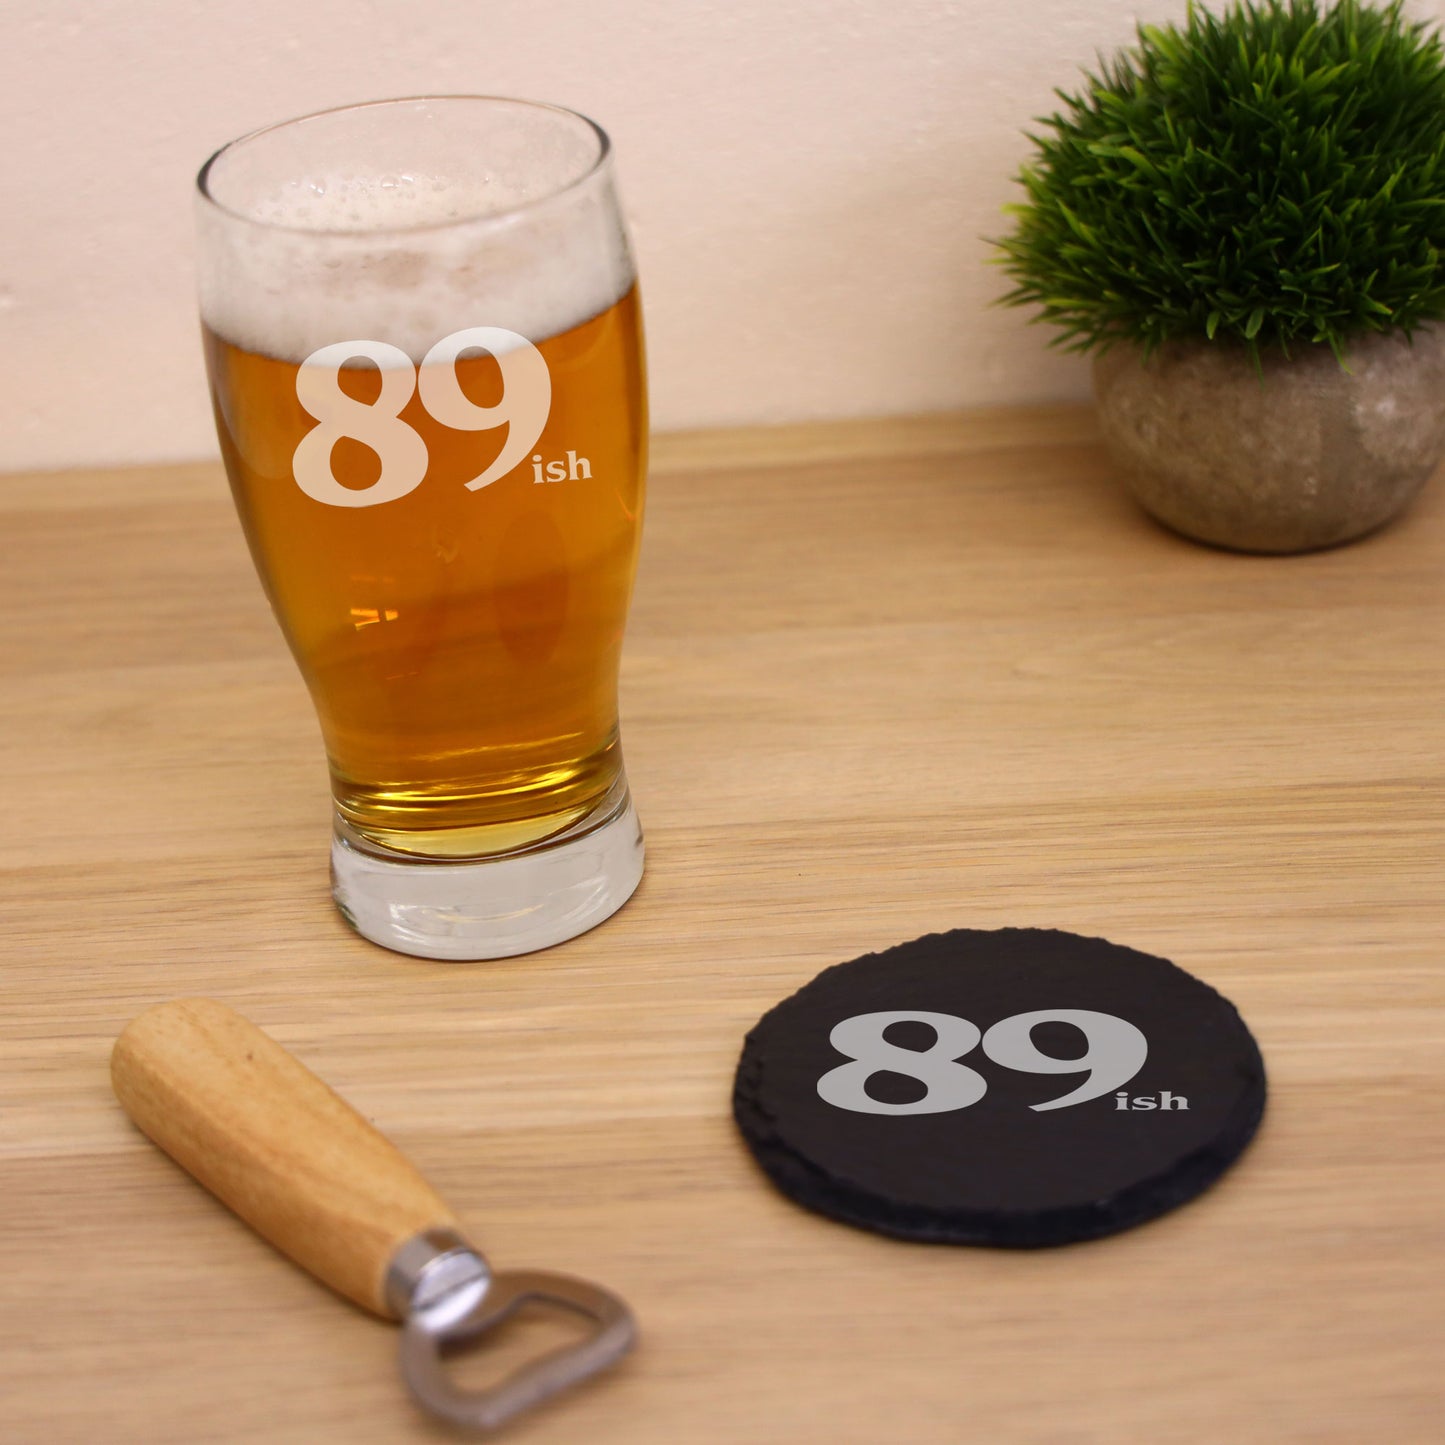 89ish Pint Glass and/or Coaster Set  - Always Looking Good - Glass & Round Coaster Set  